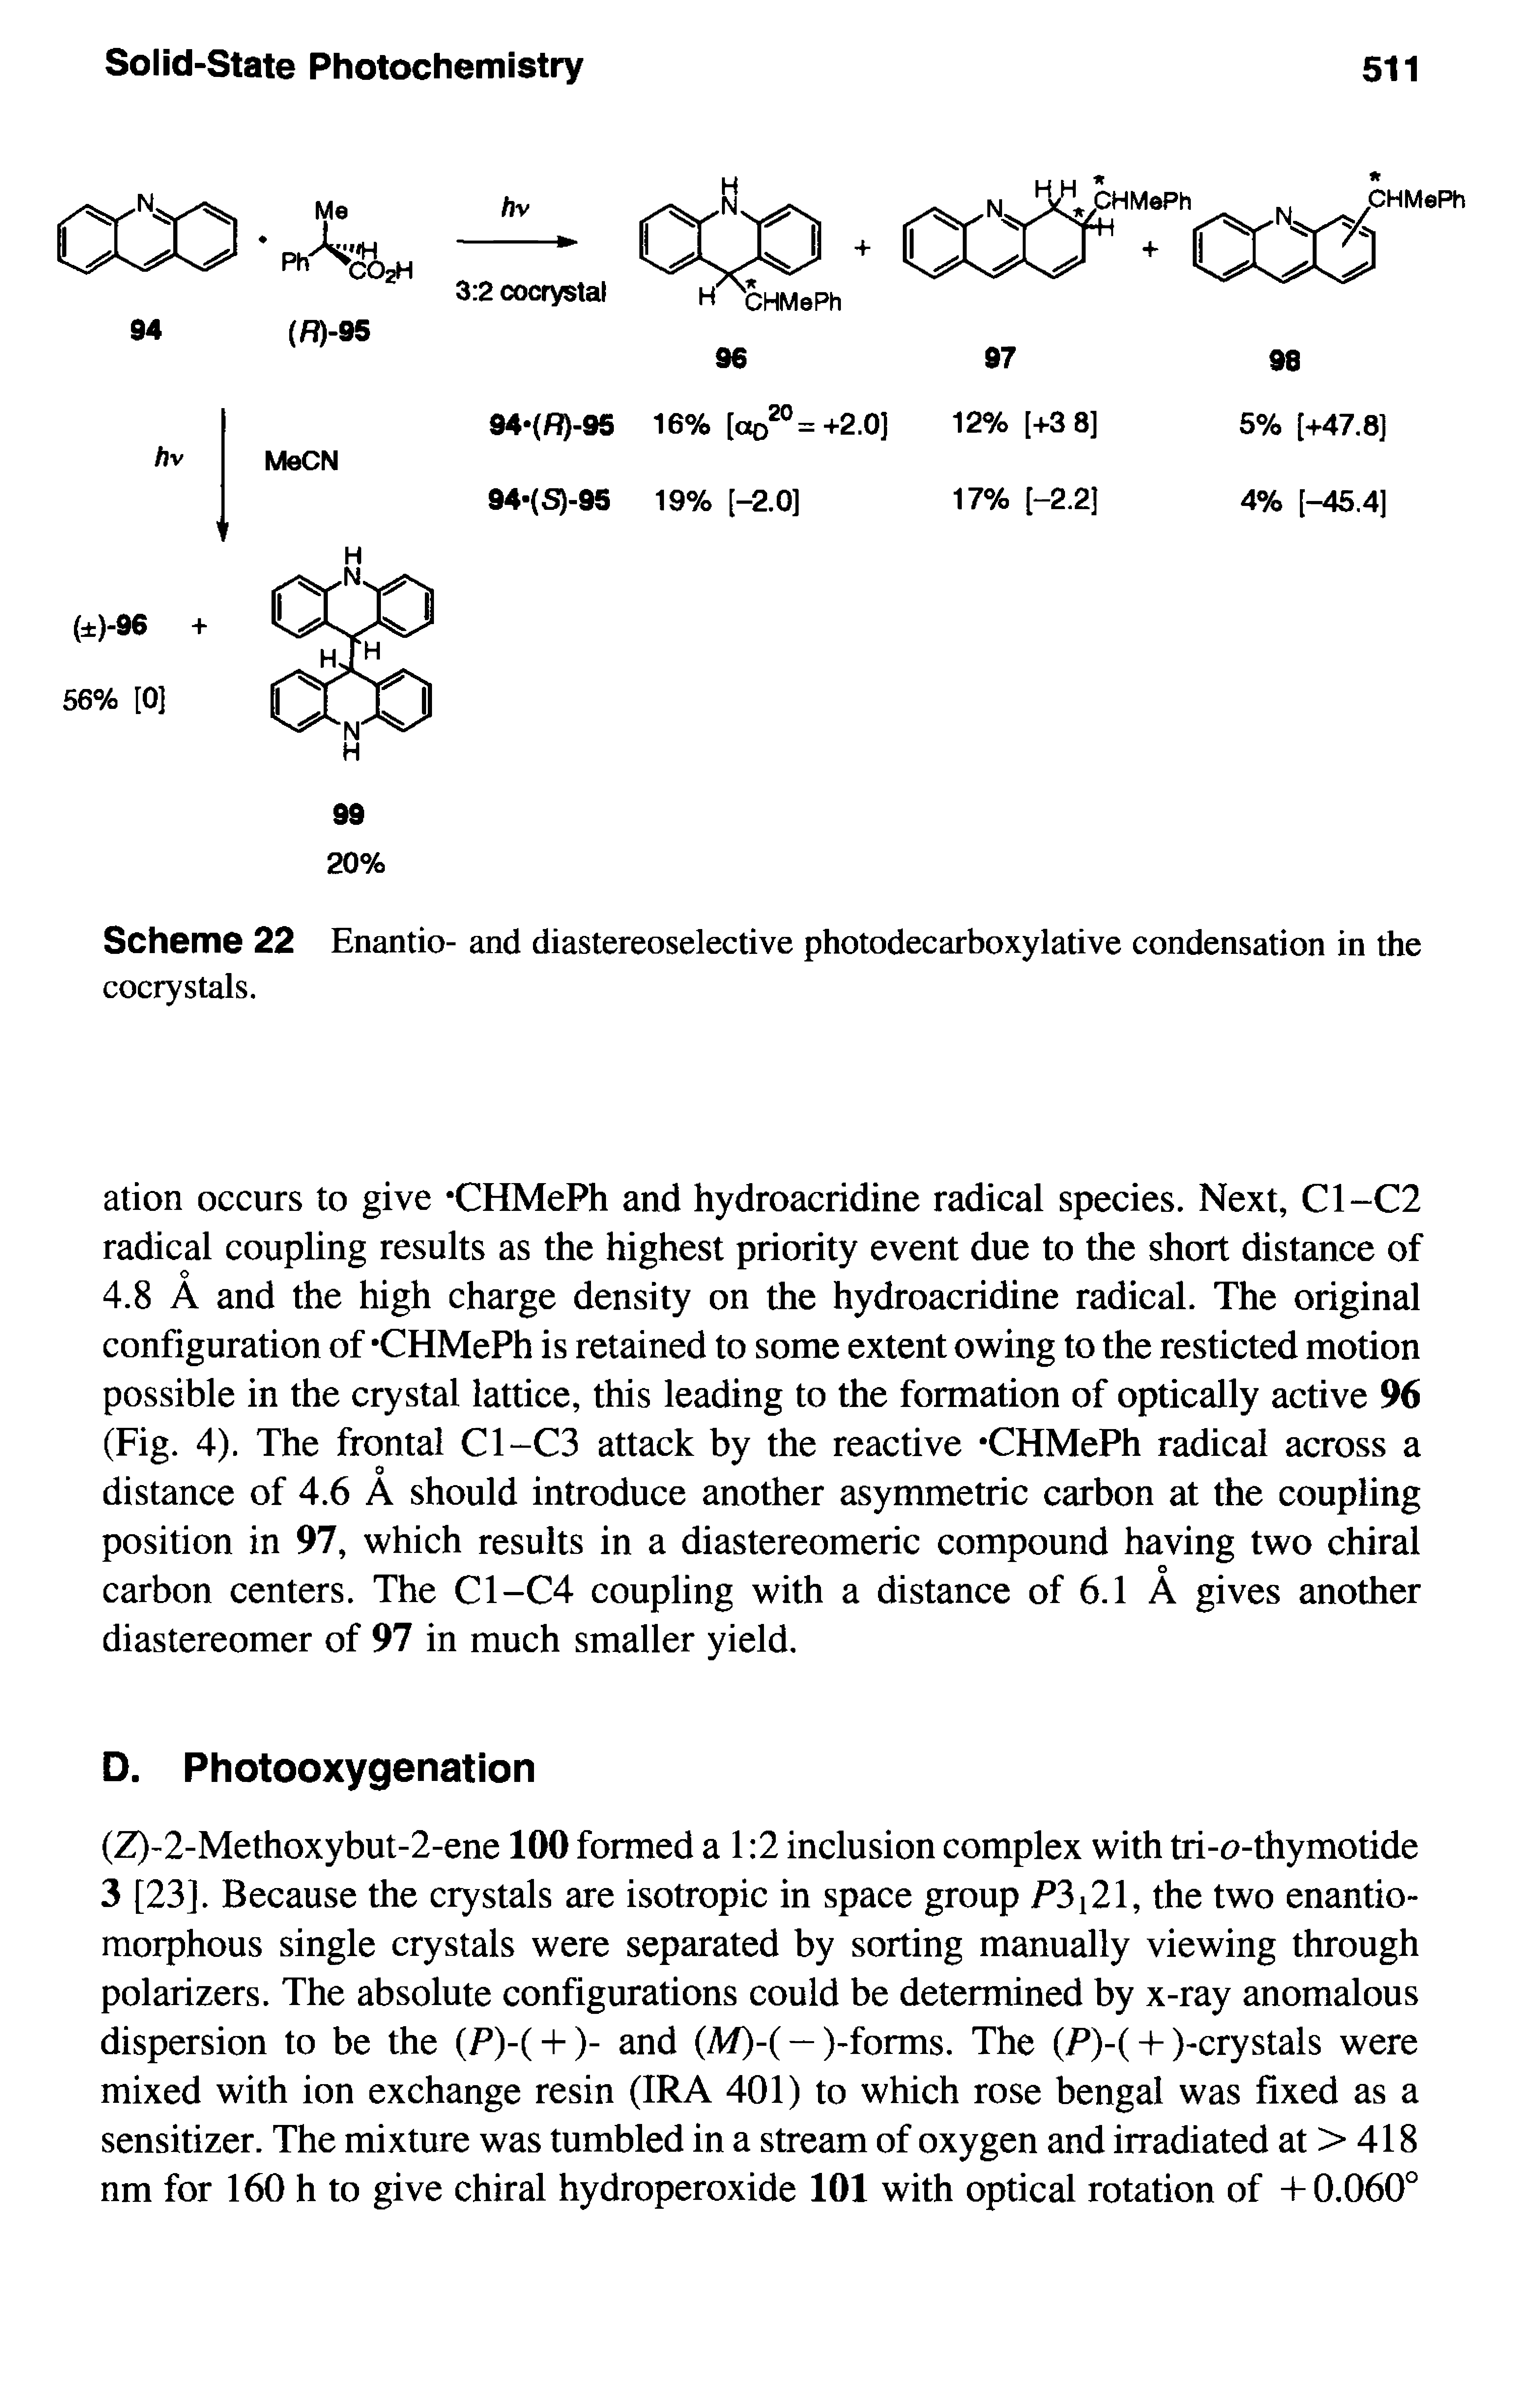 Scheme 22 Enantio- and diastereoselective photodecarboxylative condensation in the cocrystals.